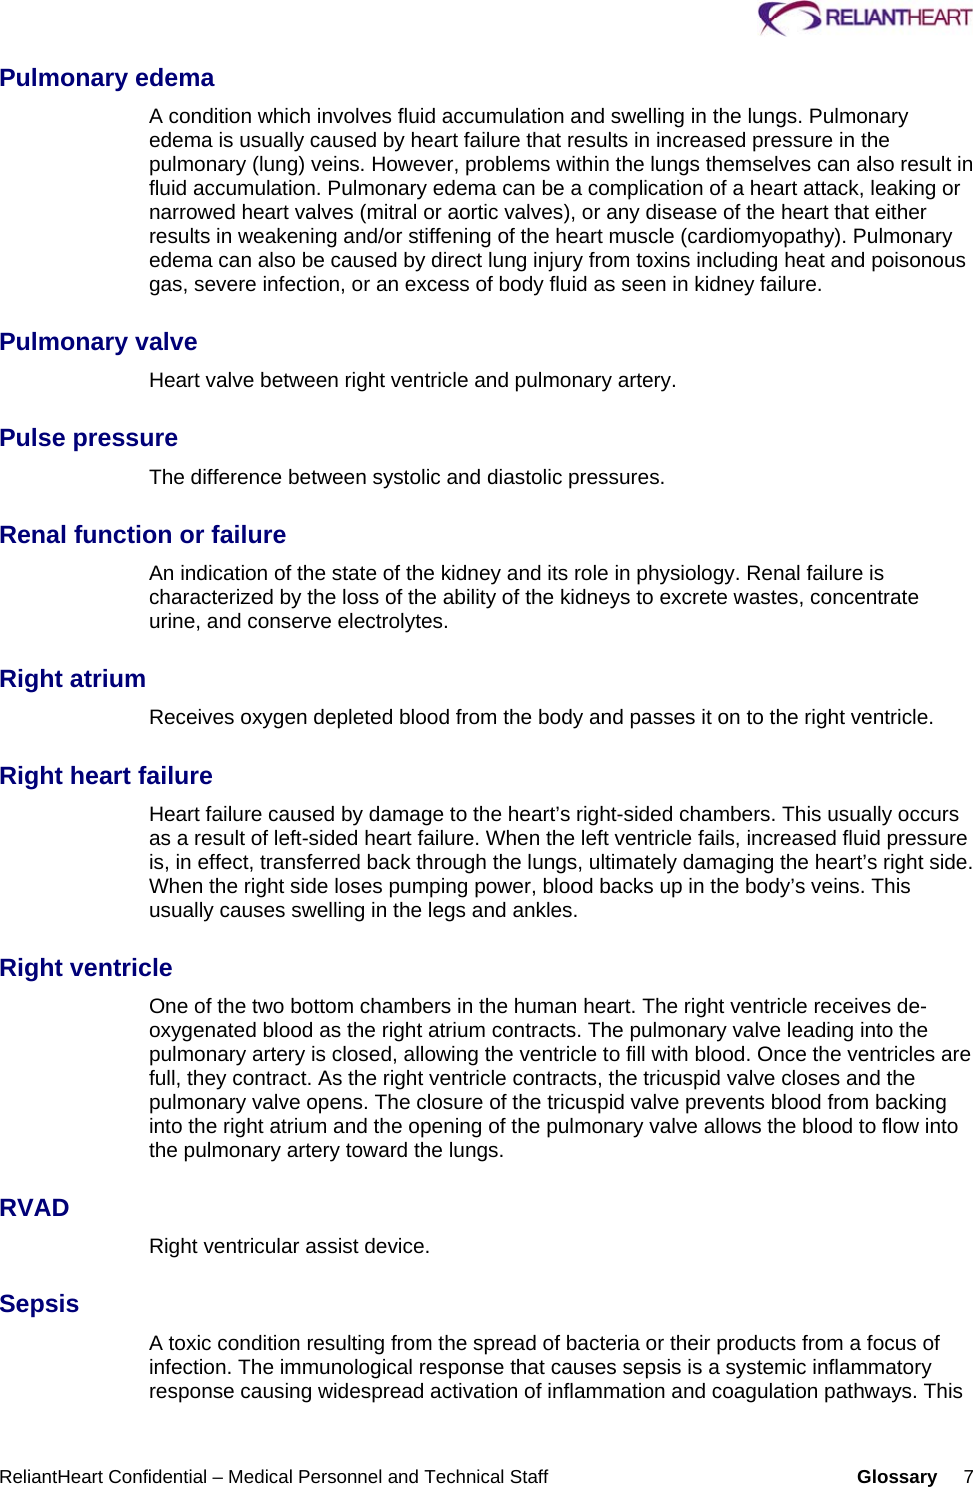     ReliantHeart Confidential – Medical Personnel and Technical Staff  Glossary     7 Pulmonary edema A condition which involves fluid accumulation and swelling in the lungs. Pulmonary edema is usually caused by heart failure that results in increased pressure in the pulmonary (lung) veins. However, problems within the lungs themselves can also result in fluid accumulation. Pulmonary edema can be a complication of a heart attack, leaking or narrowed heart valves (mitral or aortic valves), or any disease of the heart that either results in weakening and/or stiffening of the heart muscle (cardiomyopathy). Pulmonary edema can also be caused by direct lung injury from toxins including heat and poisonous gas, severe infection, or an excess of body fluid as seen in kidney failure.  Pulmonary valve Heart valve between right ventricle and pulmonary artery.  Pulse pressure The difference between systolic and diastolic pressures.  Renal function or failure An indication of the state of the kidney and its role in physiology. Renal failure is characterized by the loss of the ability of the kidneys to excrete wastes, concentrate urine, and conserve electrolytes.  Right atrium Receives oxygen depleted blood from the body and passes it on to the right ventricle.  Right heart failure Heart failure caused by damage to the heart’s right-sided chambers. This usually occurs as a result of left-sided heart failure. When the left ventricle fails, increased fluid pressure is, in effect, transferred back through the lungs, ultimately damaging the heart’s right side. When the right side loses pumping power, blood backs up in the body’s veins. This usually causes swelling in the legs and ankles.  Right ventricle One of the two bottom chambers in the human heart. The right ventricle receives de-oxygenated blood as the right atrium contracts. The pulmonary valve leading into the pulmonary artery is closed, allowing the ventricle to fill with blood. Once the ventricles are full, they contract. As the right ventricle contracts, the tricuspid valve closes and the pulmonary valve opens. The closure of the tricuspid valve prevents blood from backing into the right atrium and the opening of the pulmonary valve allows the blood to flow into the pulmonary artery toward the lungs.  RVAD Right ventricular assist device.  Sepsis A toxic condition resulting from the spread of bacteria or their products from a focus of infection. The immunological response that causes sepsis is a systemic inflammatory response causing widespread activation of inflammation and coagulation pathways. This 